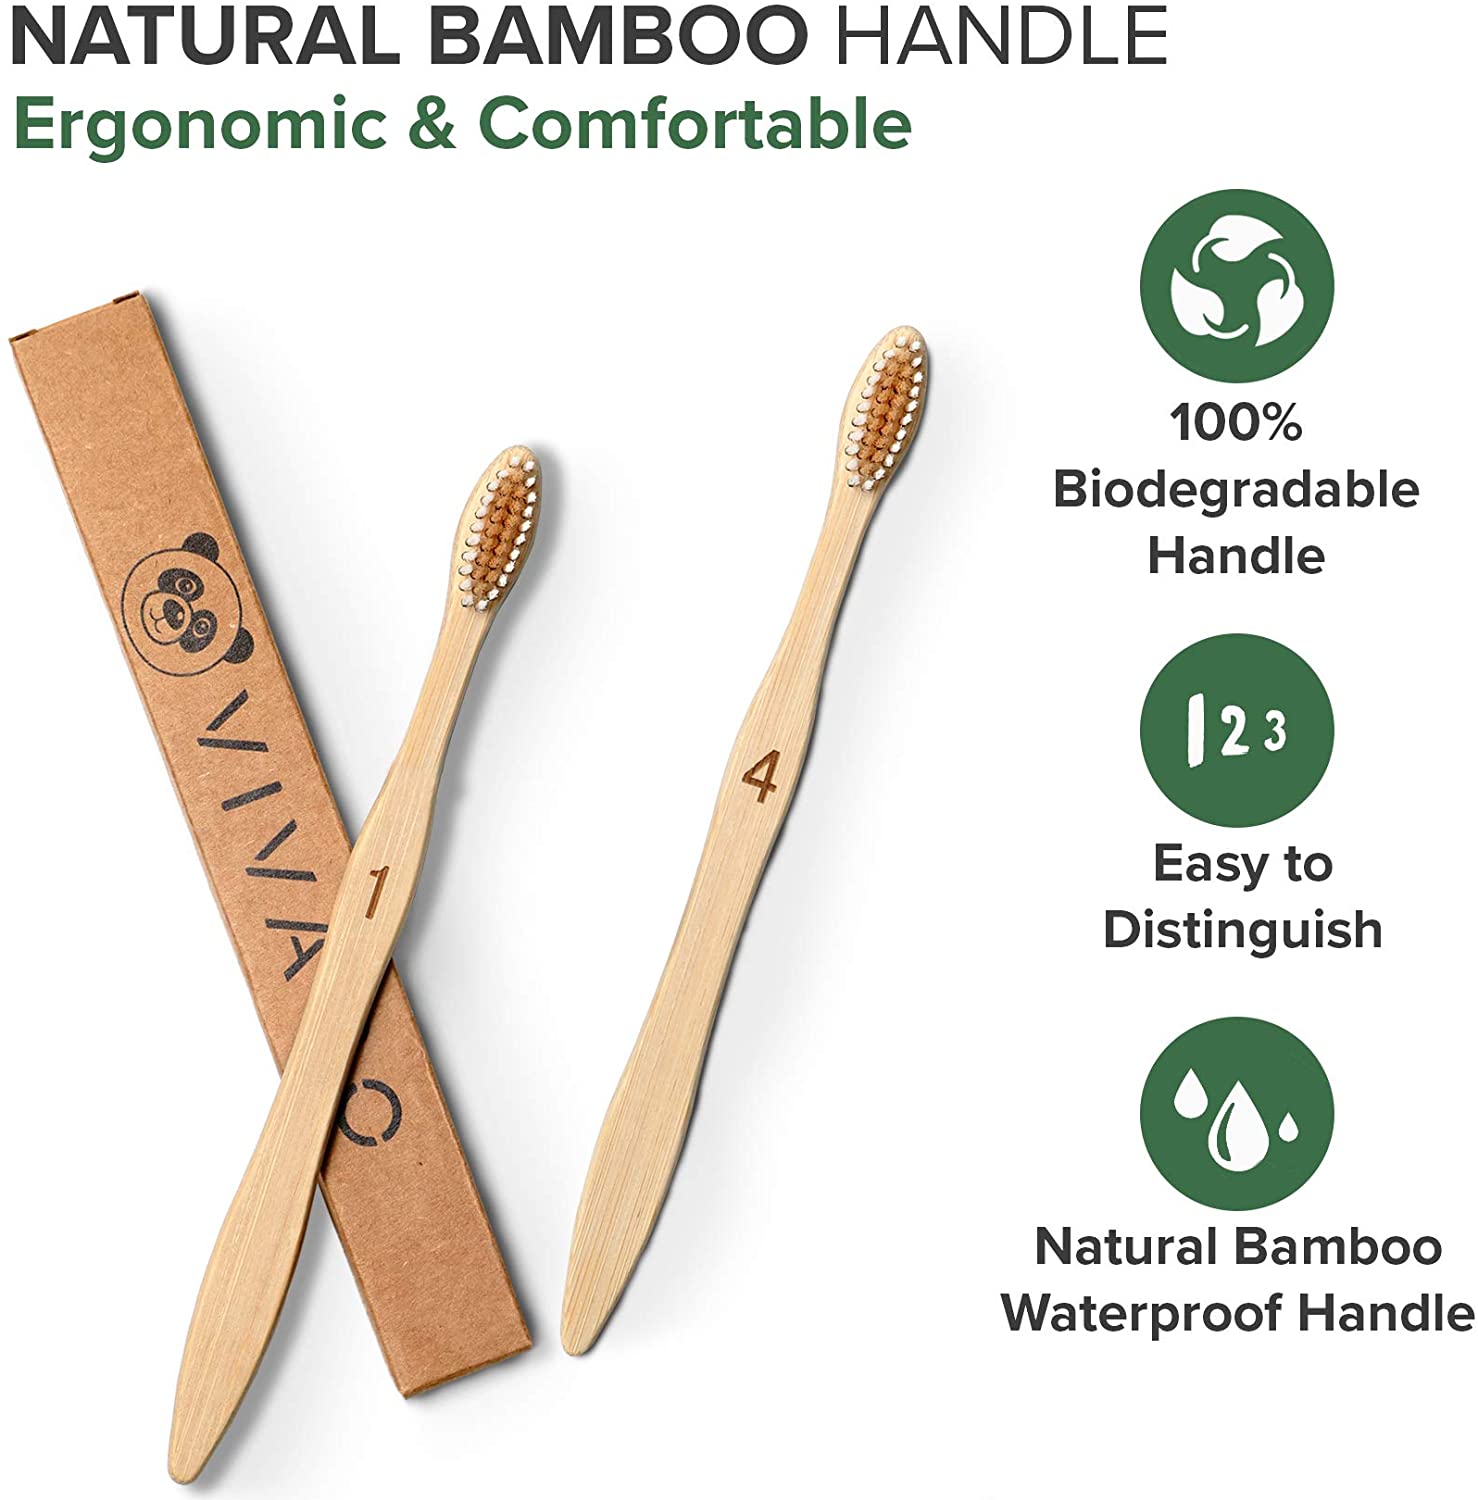 Biodegradable Bamboo Toothbrushes 10 Pack - BPA Free Soft Bristles Toothbrushes, Eco-Friendly, Compostable Natural Wooden Toothbrush